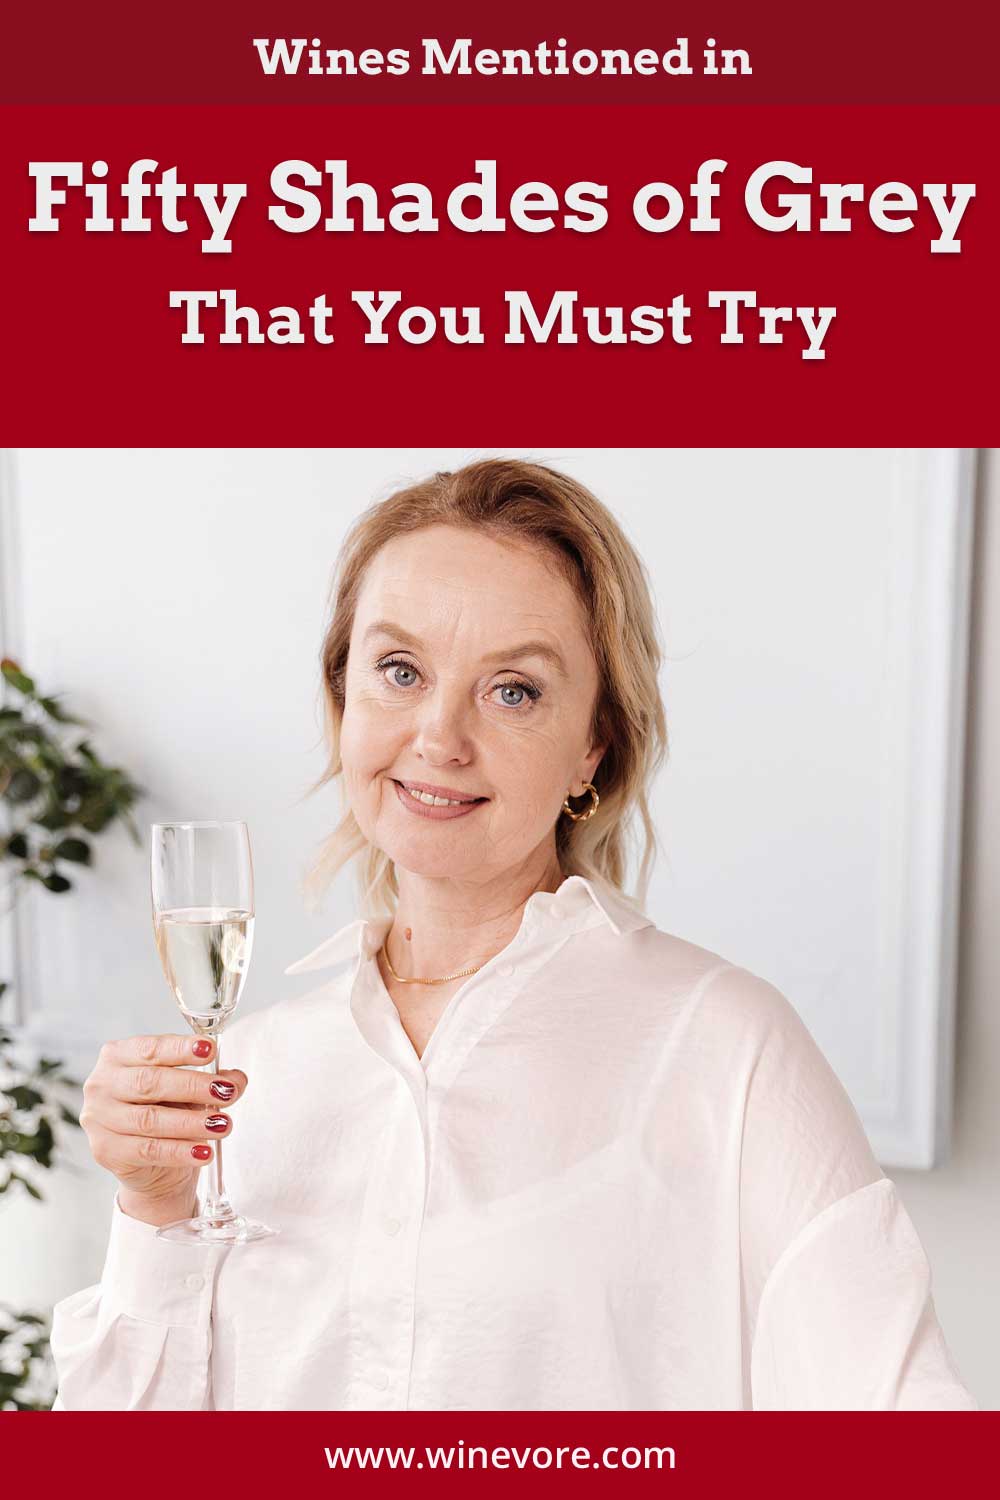 Woman in white shirt holding a wine glass - Wines Mentioned in Fifty Shades of Grey.